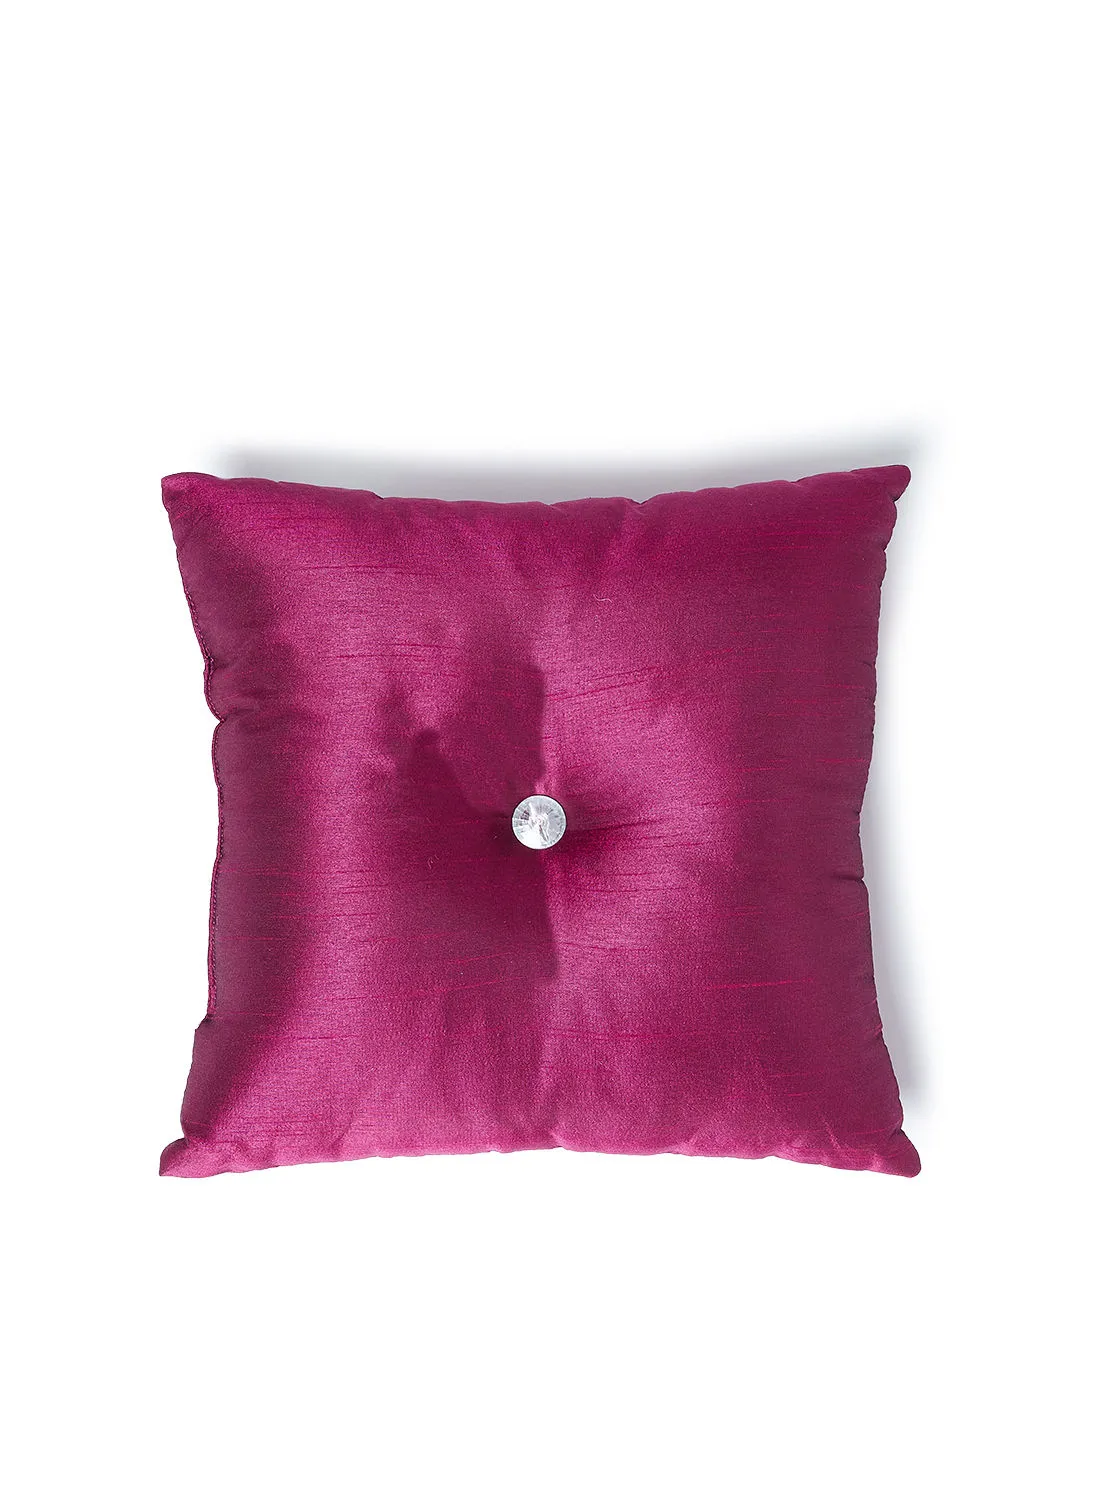 Hometown Decorative Cushion , Size 30X30 Cm Shimmery Fuchsia - 100% Polyester Bedroom Or Living Room Decoration